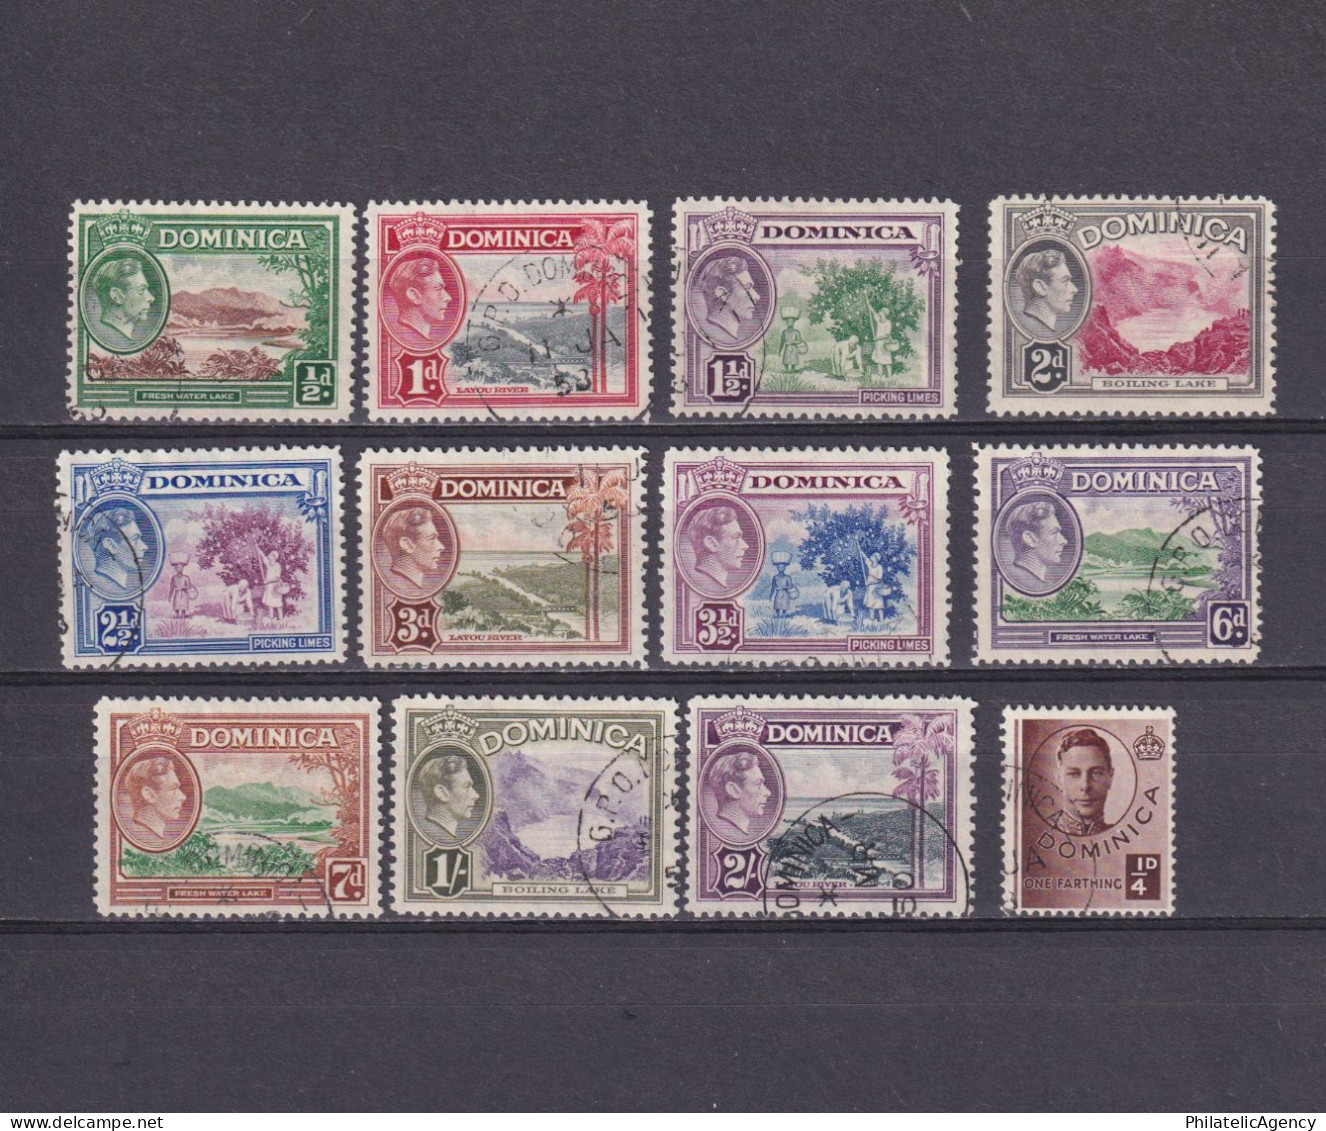 DOMINICA 1938, SG #99-109, CV £30, Part Set, Used - Dominica (...-1978)